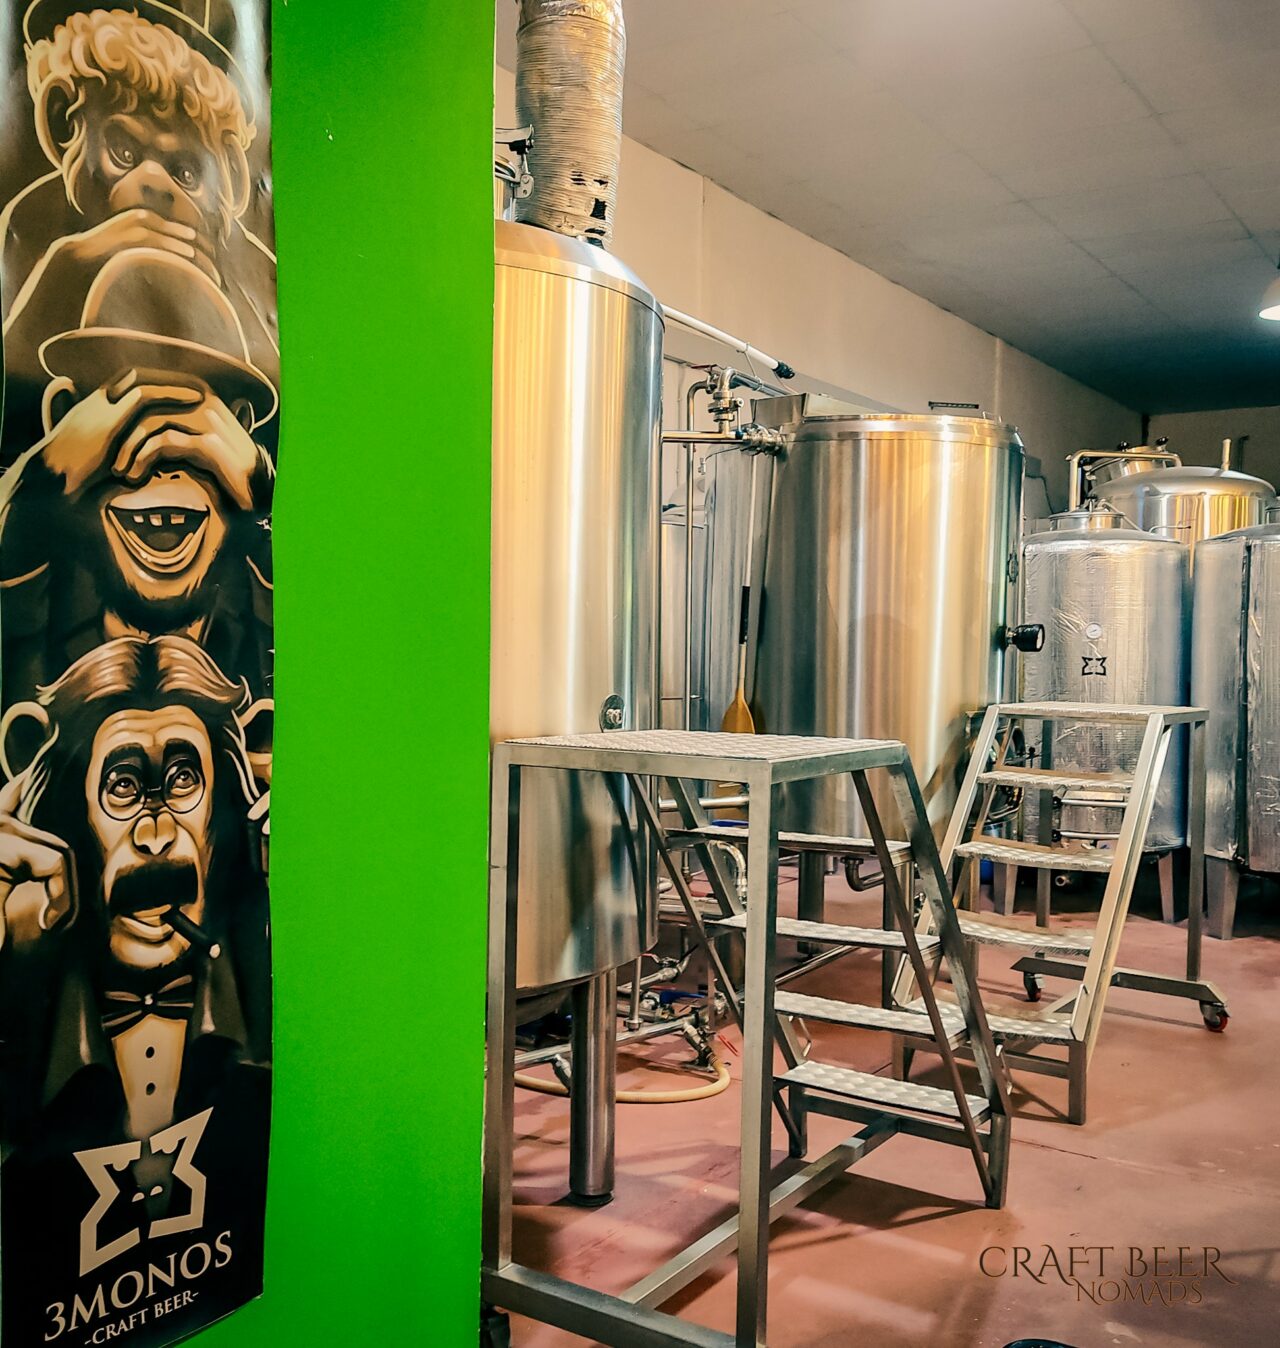 3Monos | Craft beer in Malaga in Andalusia, Spain | Craft Beer Nomads blog